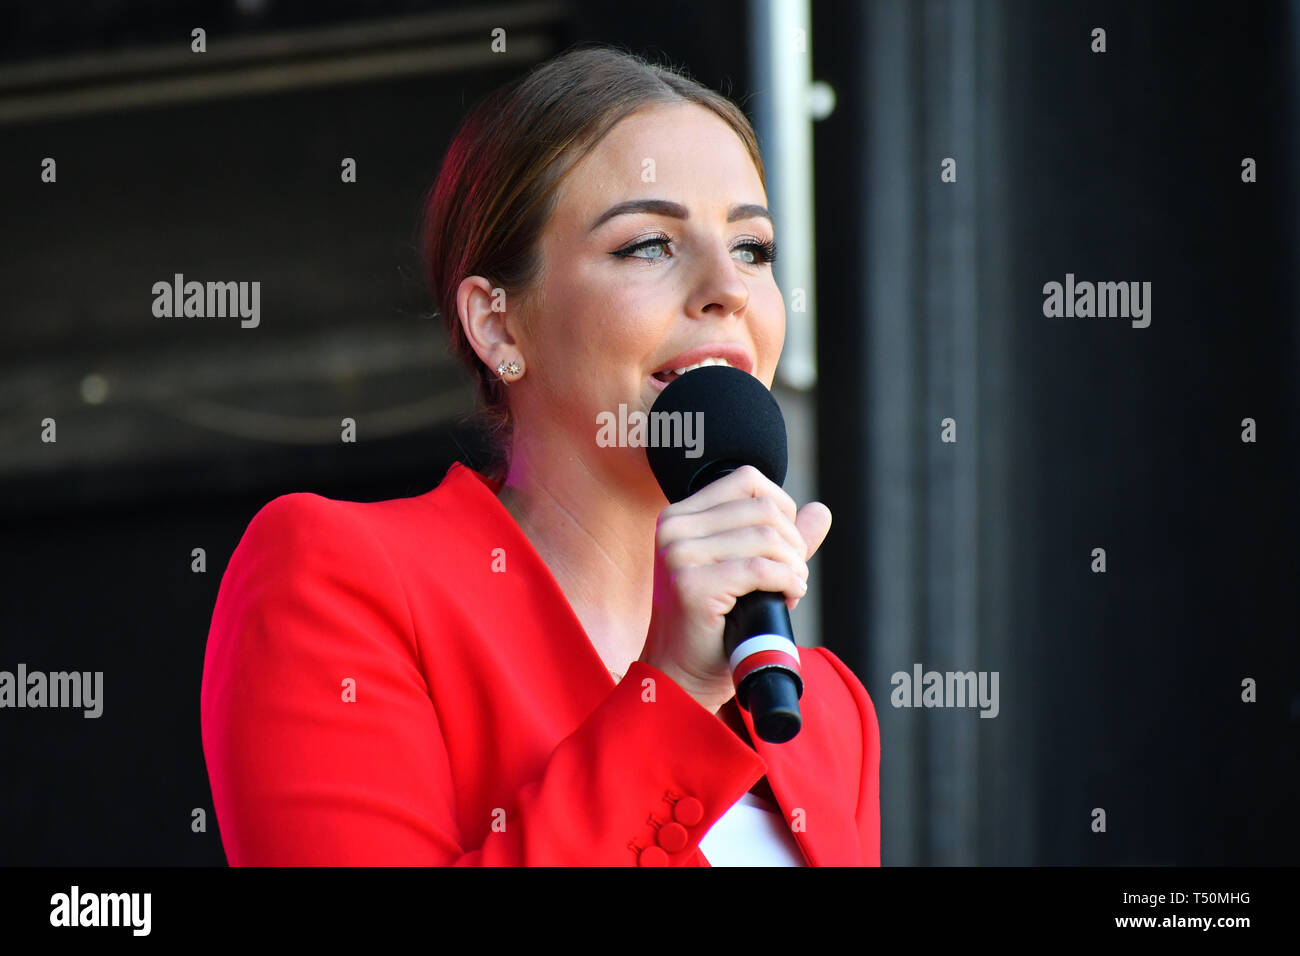 London, UK. 20th April, 2019.Lydia Bright is the presenter for the Feast of St George to celebrate English culture with music and English food stalls in Trafalgar Square on 20 April 2019, London, UK. Credit: Picture Capital/Alamy Live News Stock Photo